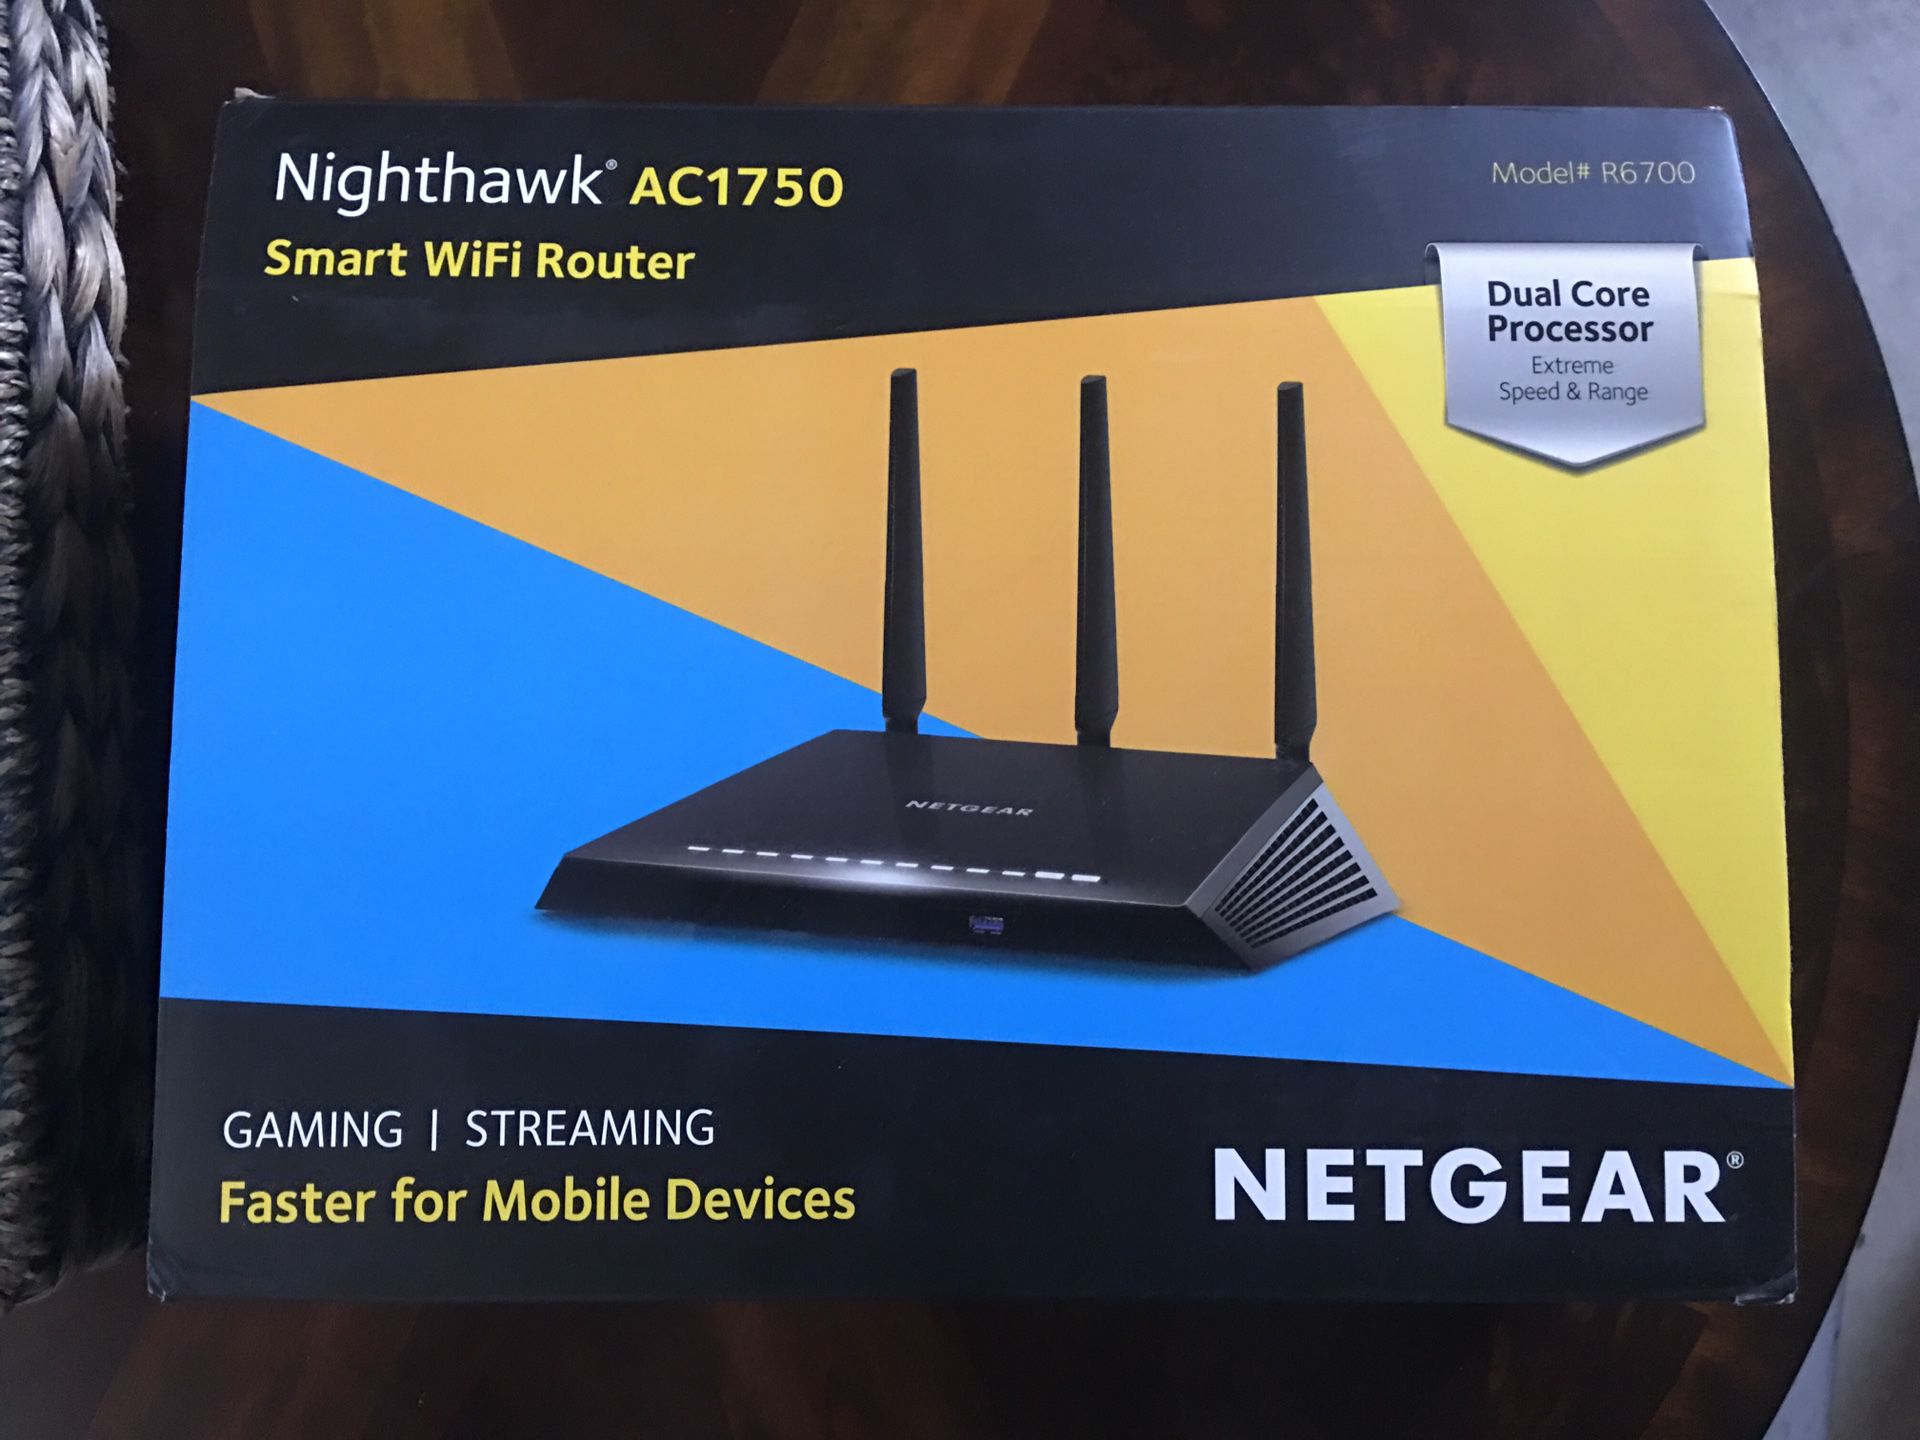 NETGEAR Nighthawk Smart WiFi Router (R6700) - AC1750 Wireless Speed (up to 1750 Mbps) | Up to 1500 sq ft Coverage & 25 Devices